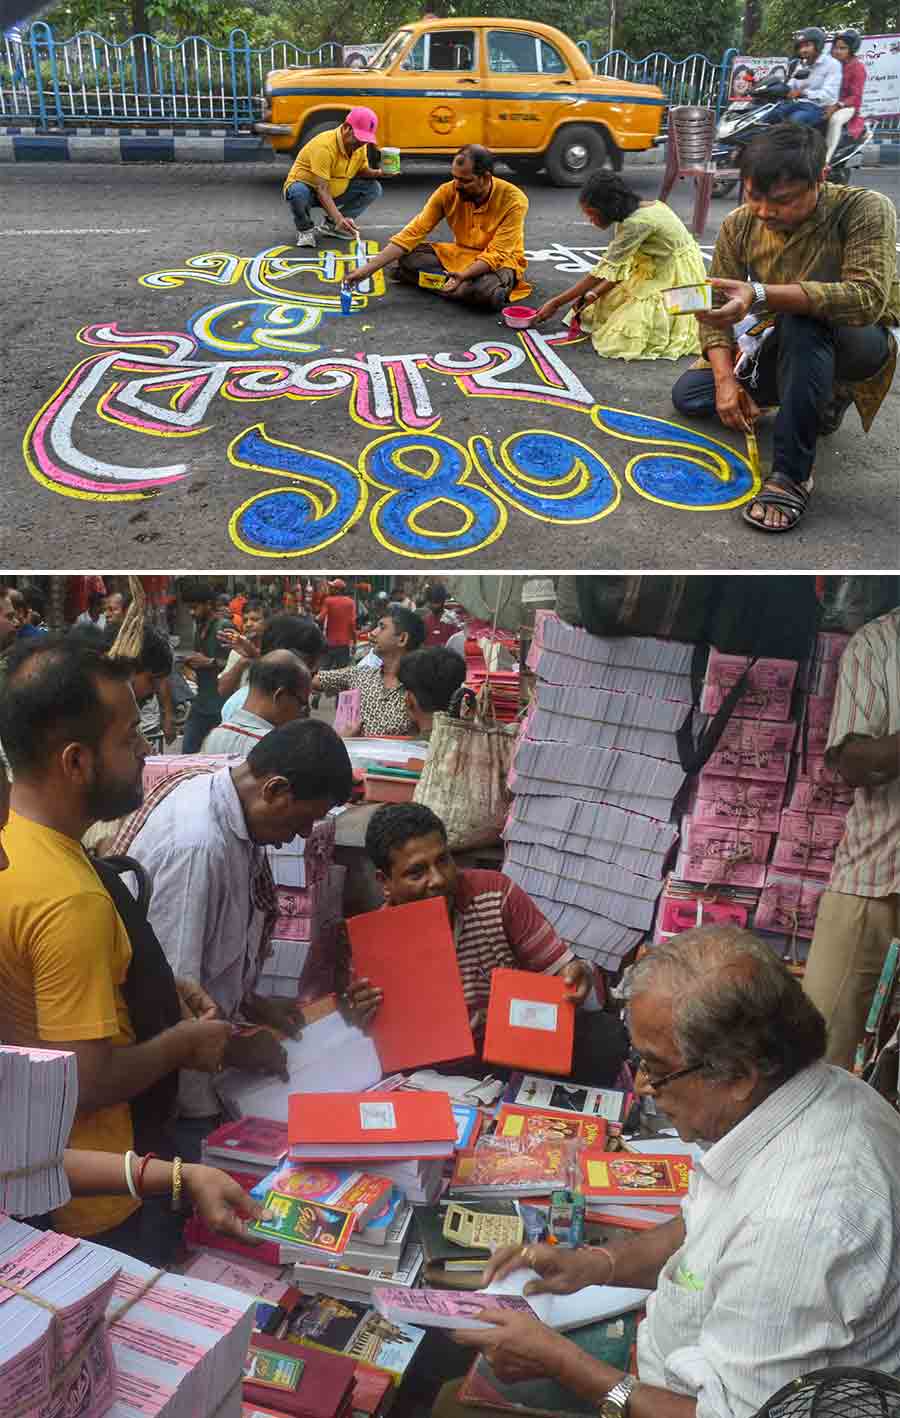 Artists draw graffiti on the street near Nandan on Saturday ahead of Bengali New Year and (above) Bengali almanac and ‘halkhata’ (books of accounts) on sale for Poila Baisakh at College Street on Saturday